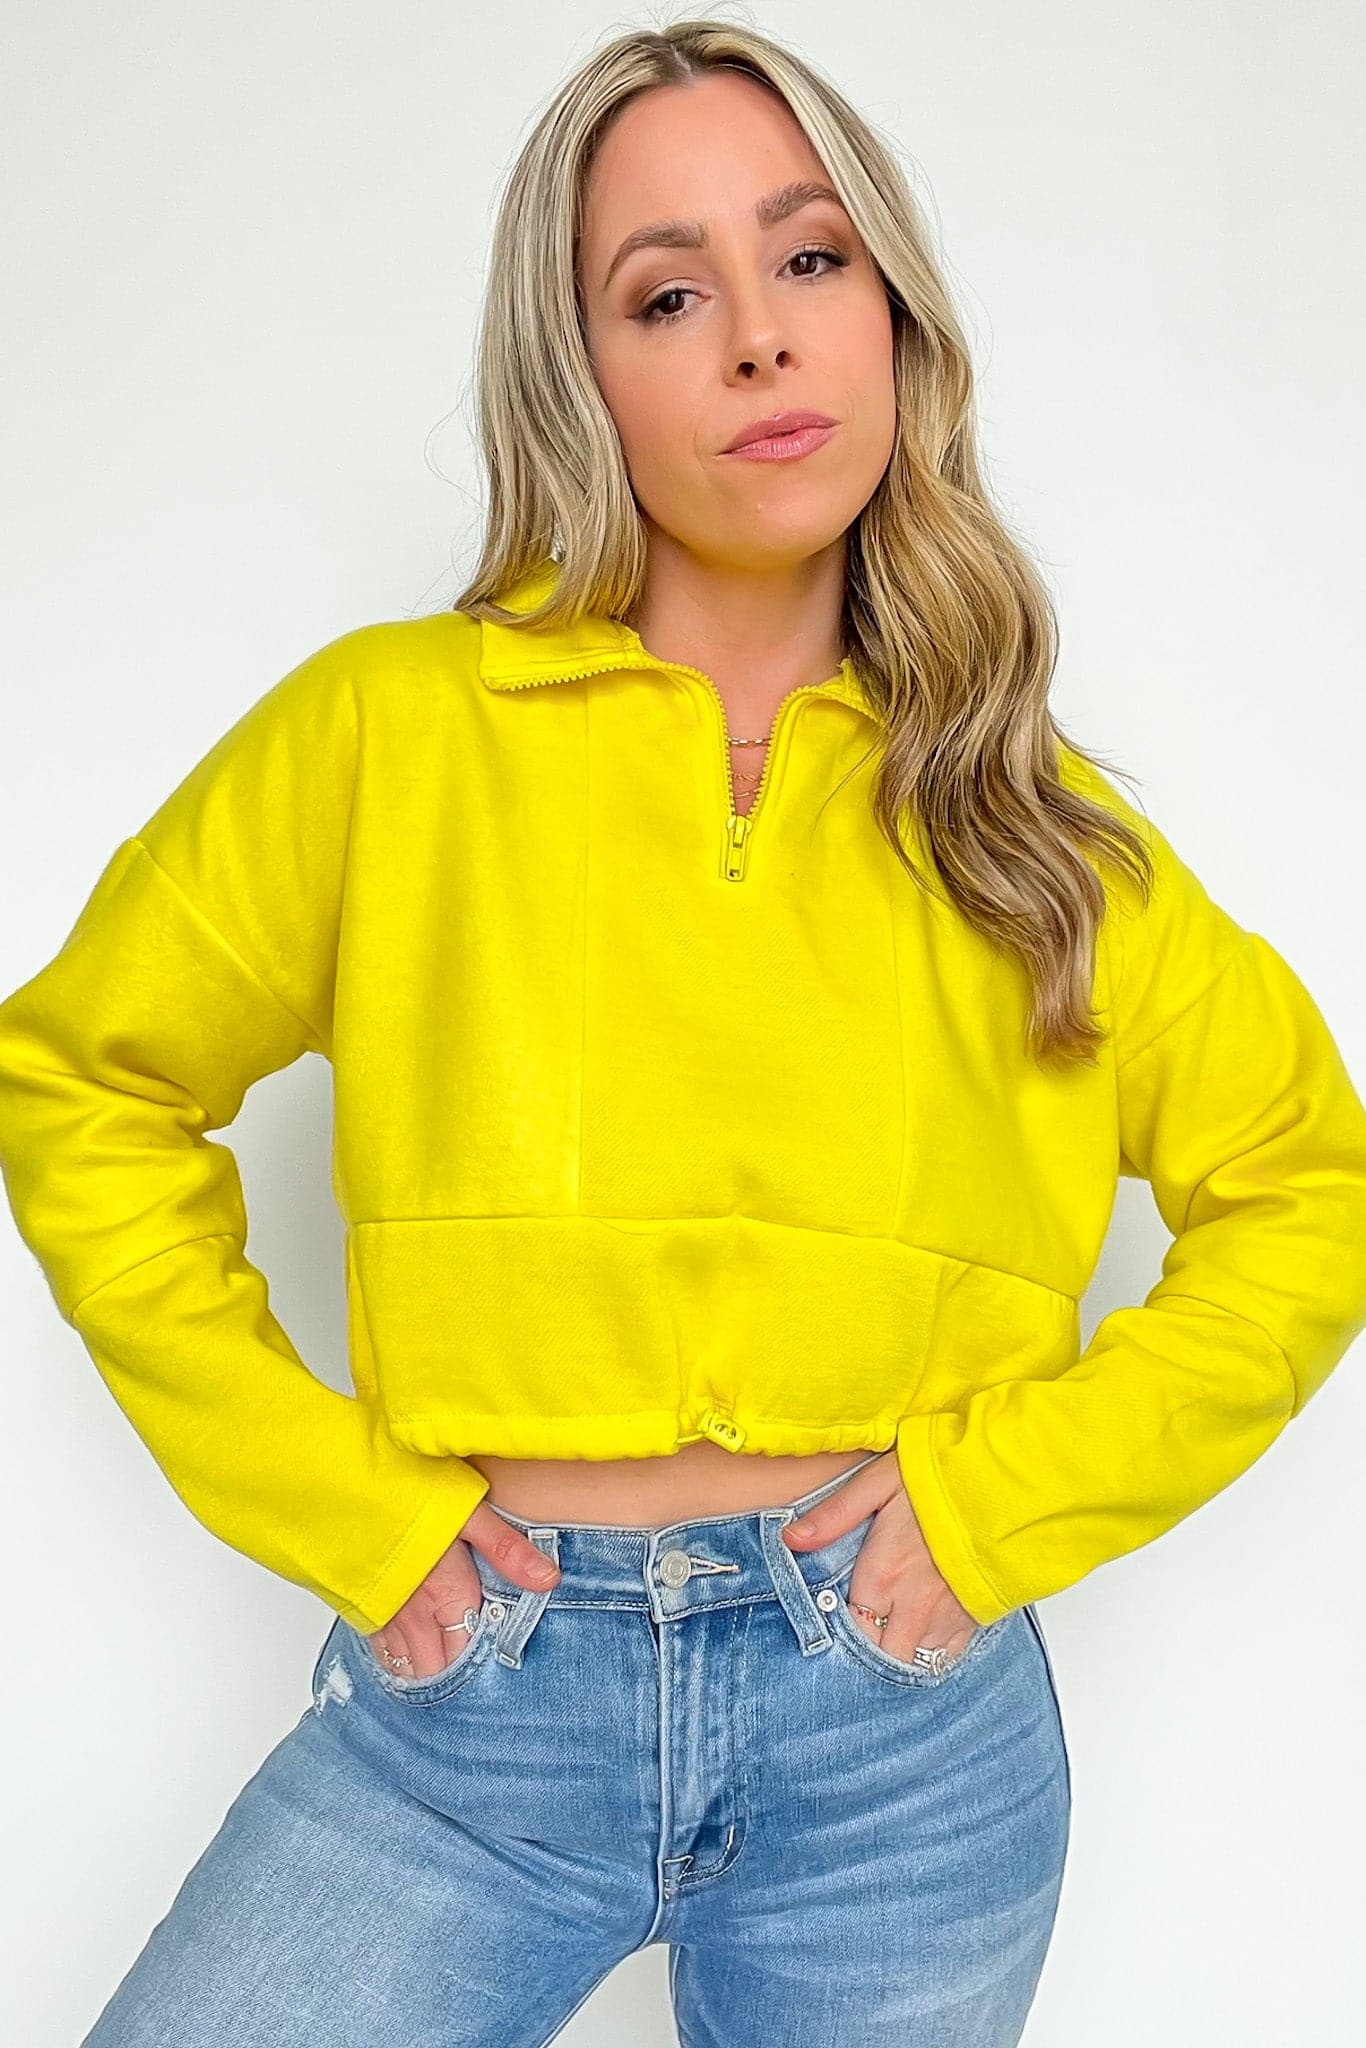  Cyndellah Long Sleeve 1/4 Zip Cropped Pullover - FINAL SALE - Madison and Mallory